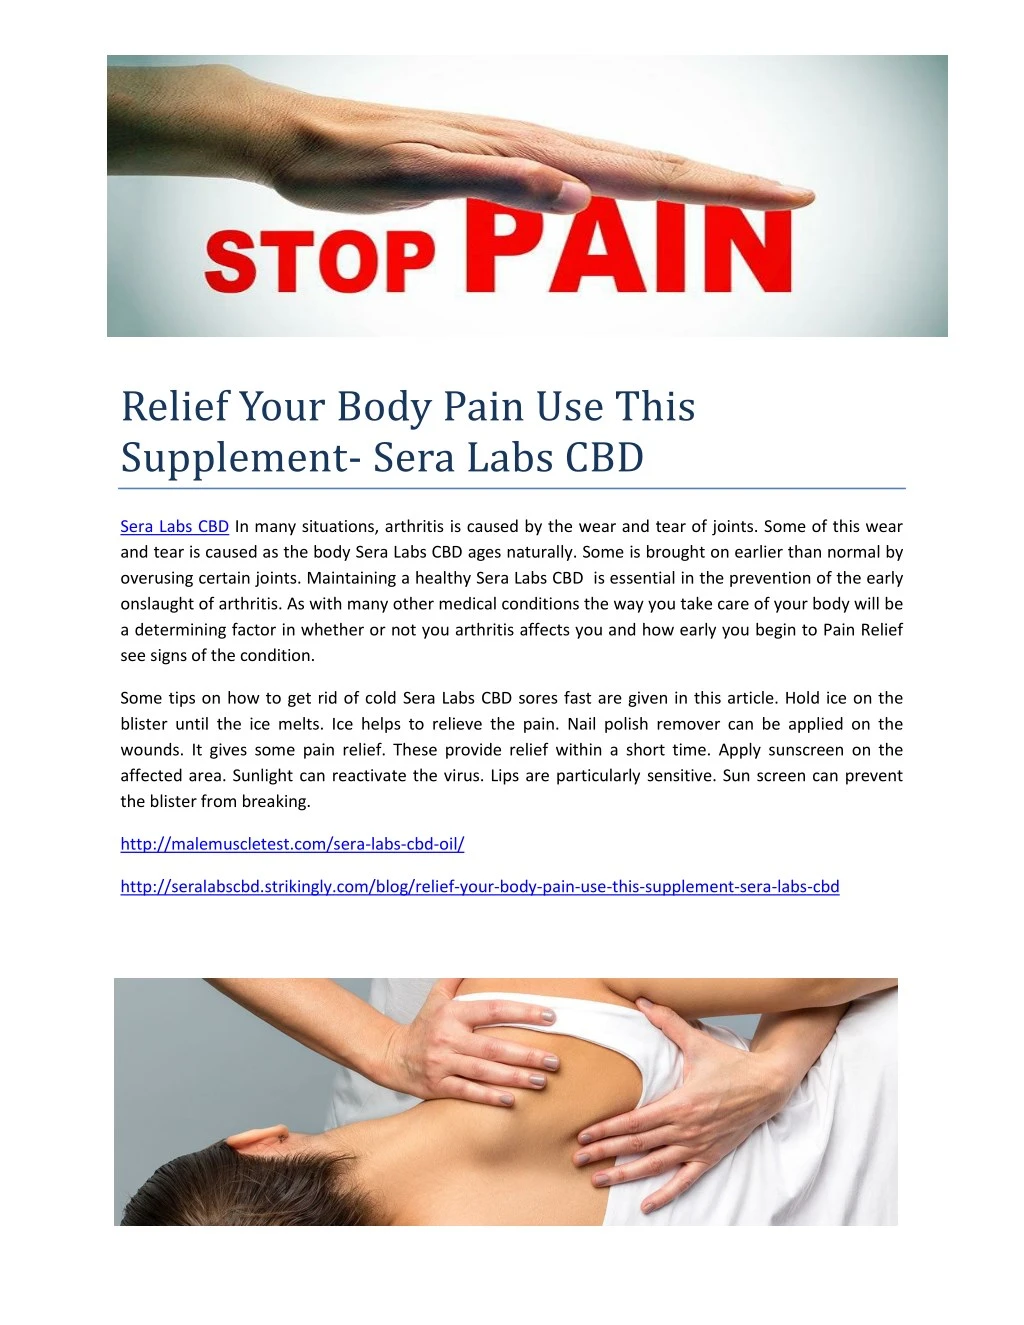 relief your body pain use this supplement sera